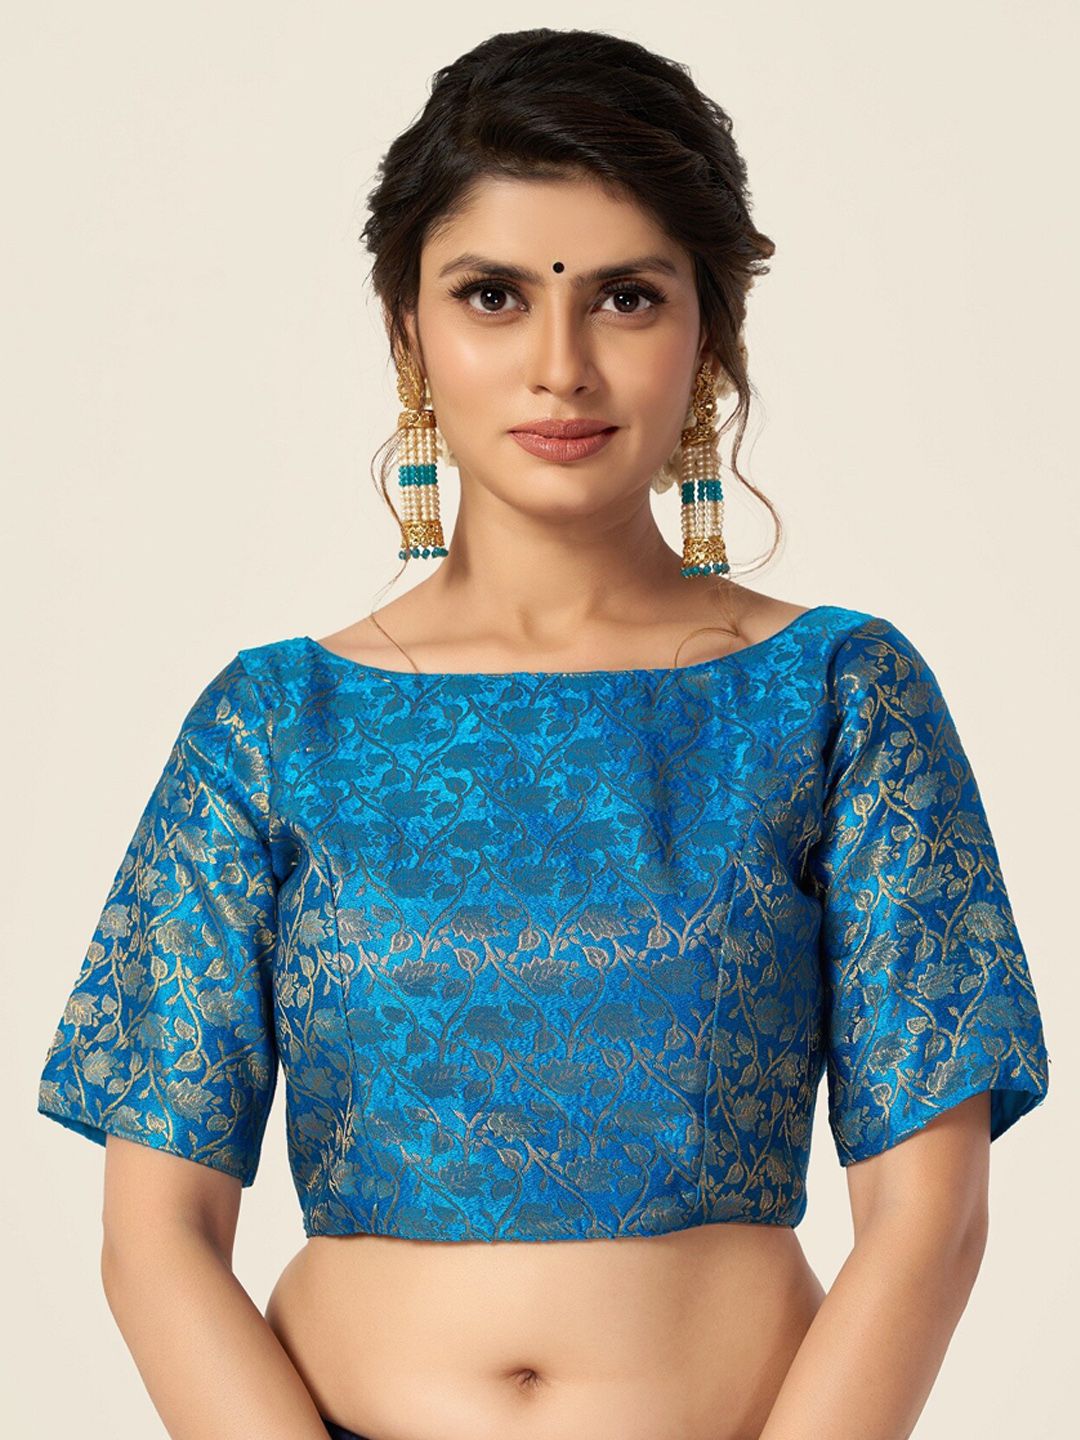 HIMRISE Women Blue Woven Design Boat Neck Saree Blouse Price in India